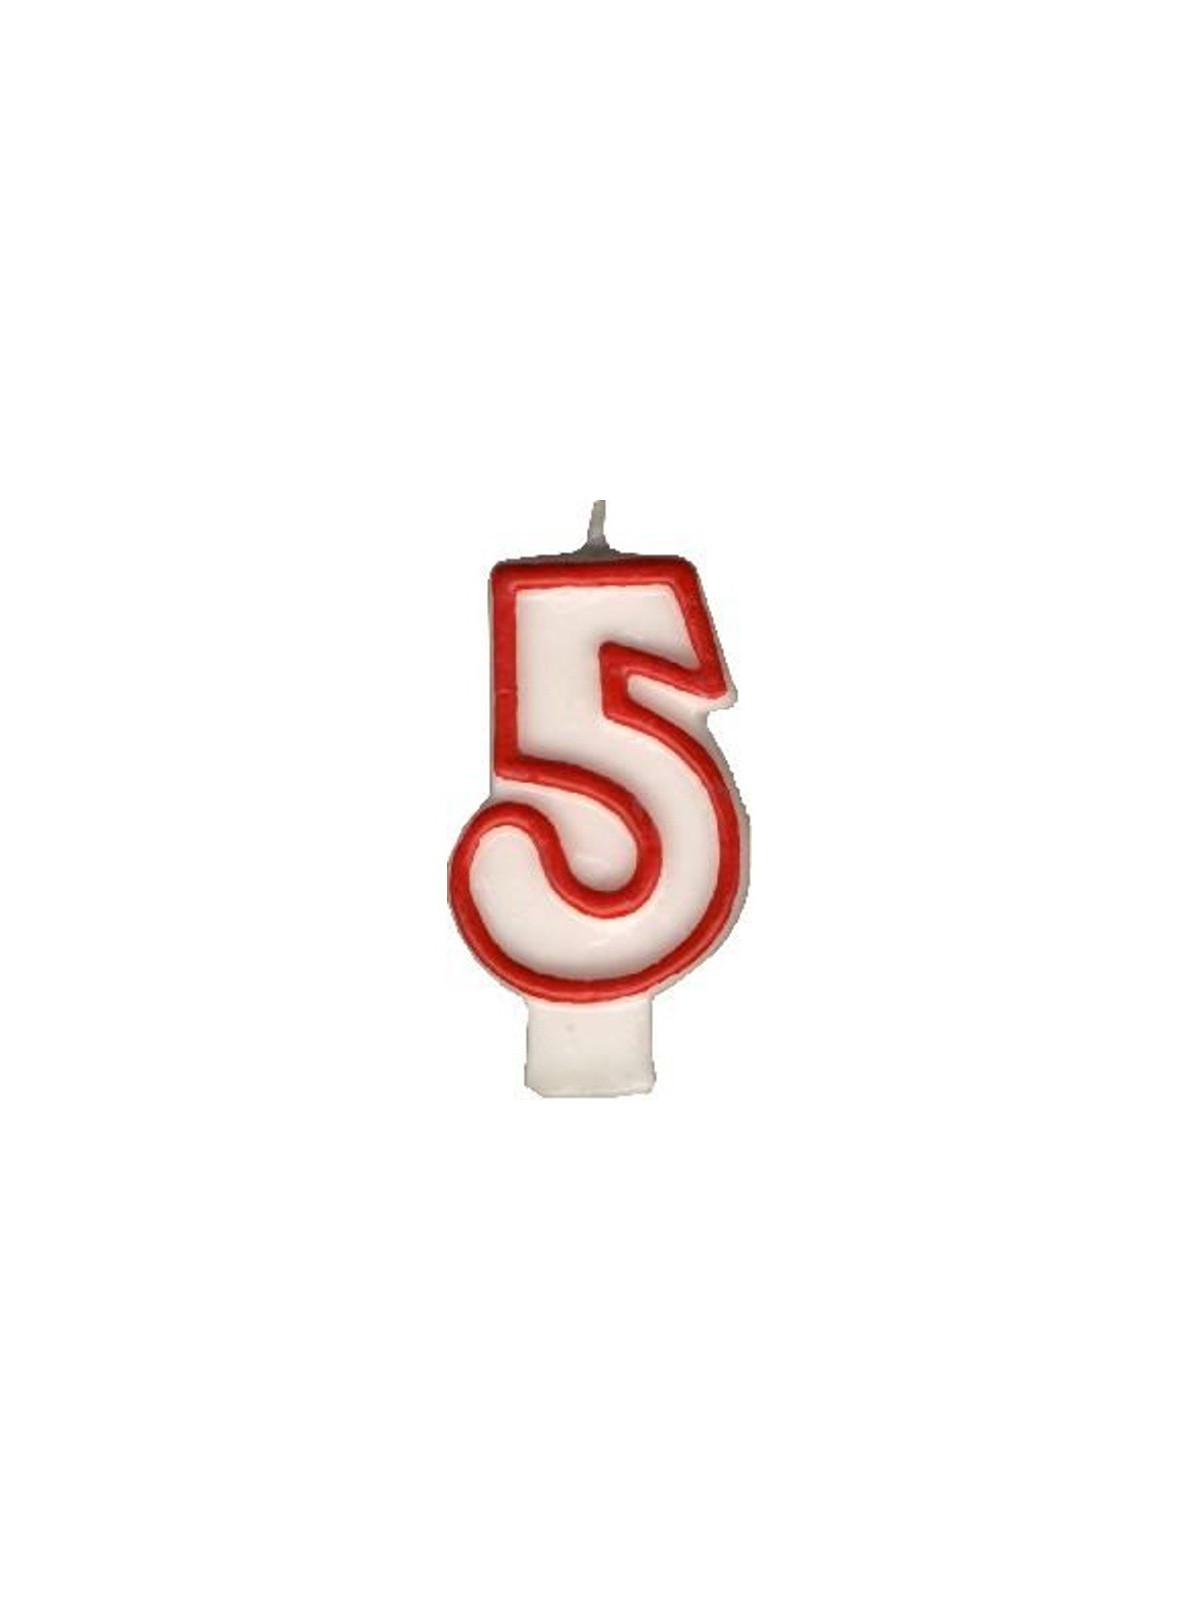 Party Numeral candle - 5